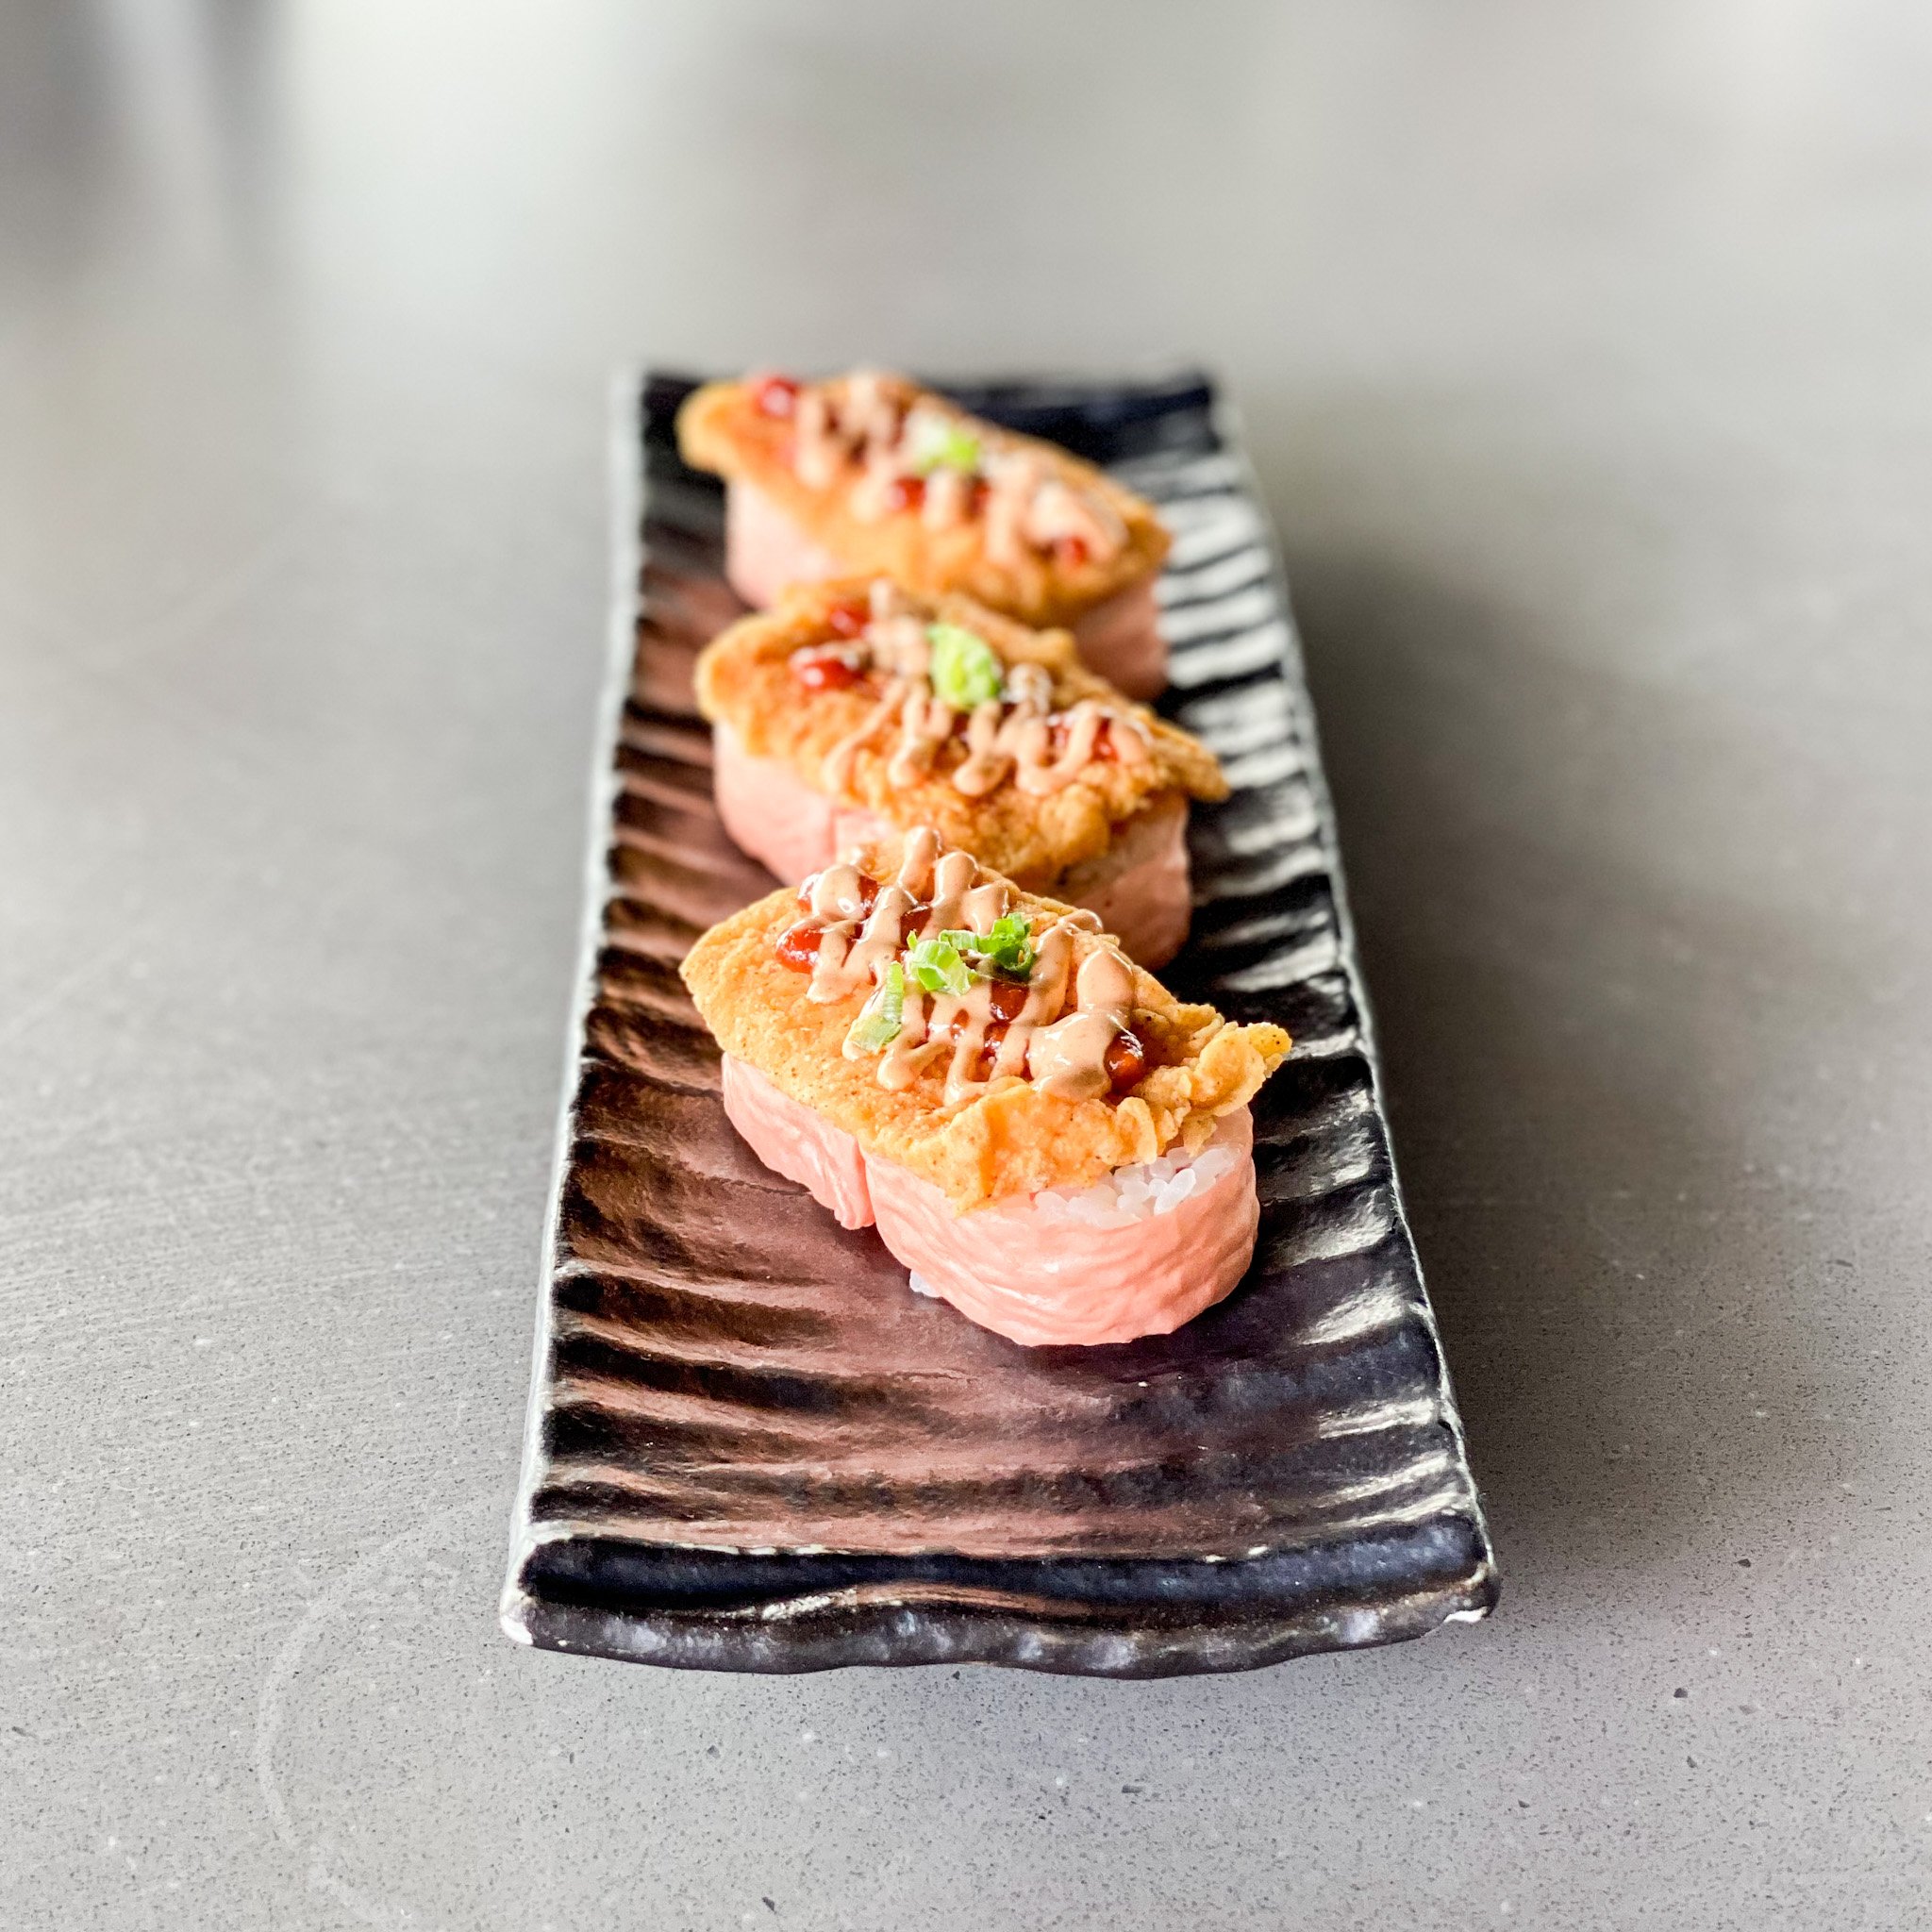 We&rsquo;re jammin&rsquo; with salmon today! Come indulge in our fried salmon roll and take advantage of the sunny vu&rsquo;s at our rooftop dining. 

Check out our other specials on 👉🏼intherawsushi.com/itr-vu 

#tulsaeats #tulsafoodie #tulsaartsdi